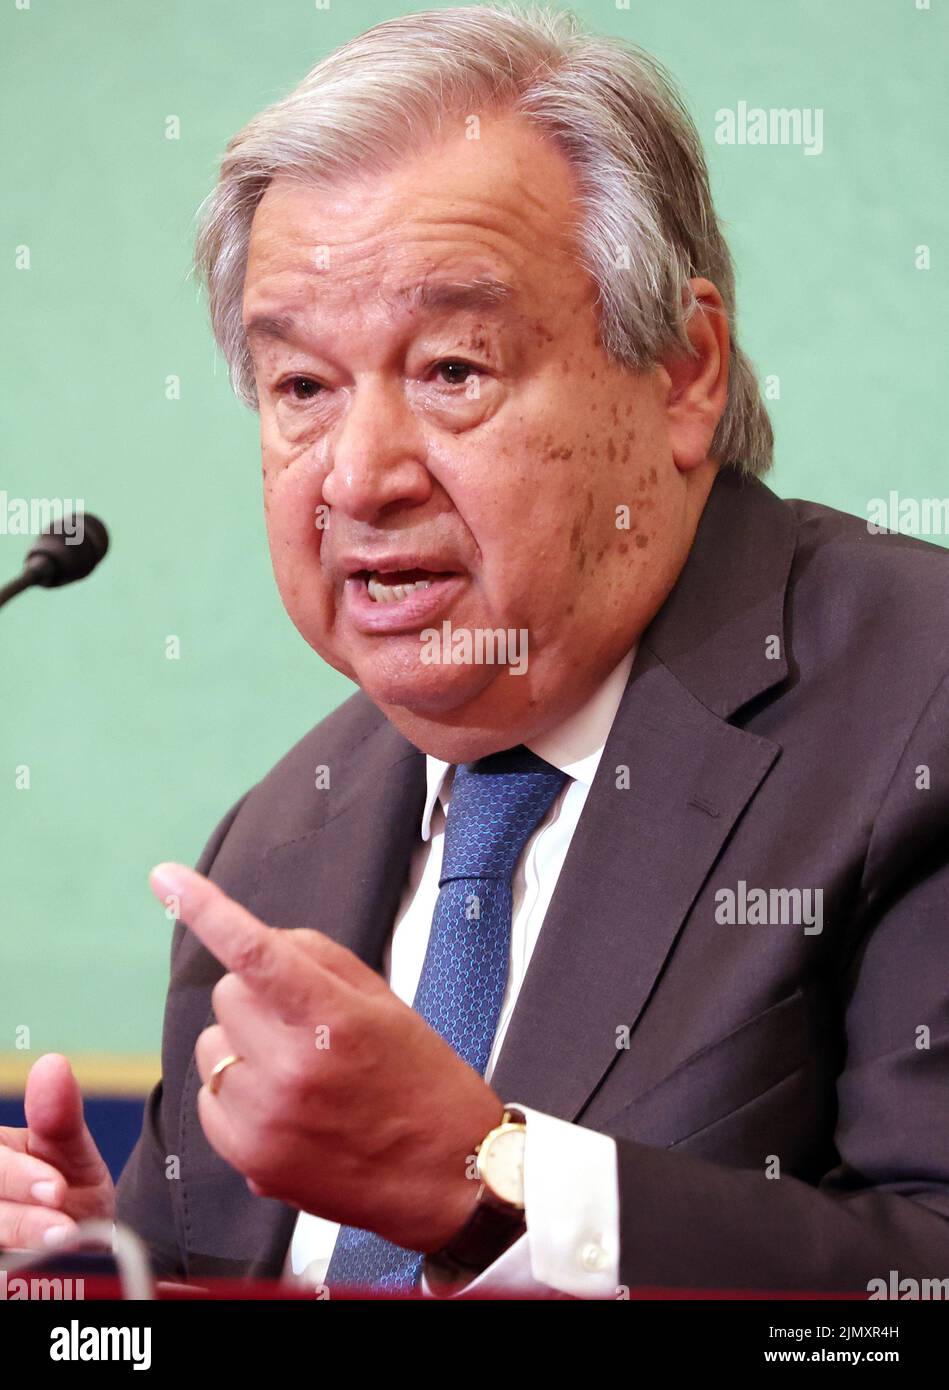 Tokyo, Japan. 8th Aug, 2022. United nations Secretary General Antonio Guterres delivers a speech at the Japan National Press Club in Tokyo on Monday, August 8, 2022. Guterres arrived in Japan on August 5 to attend the A-bomb memorial ceremony in Hiroshima on August 6. Credit: Yoshio Tsunoda/AFLO/Alamy Live News Stock Photo